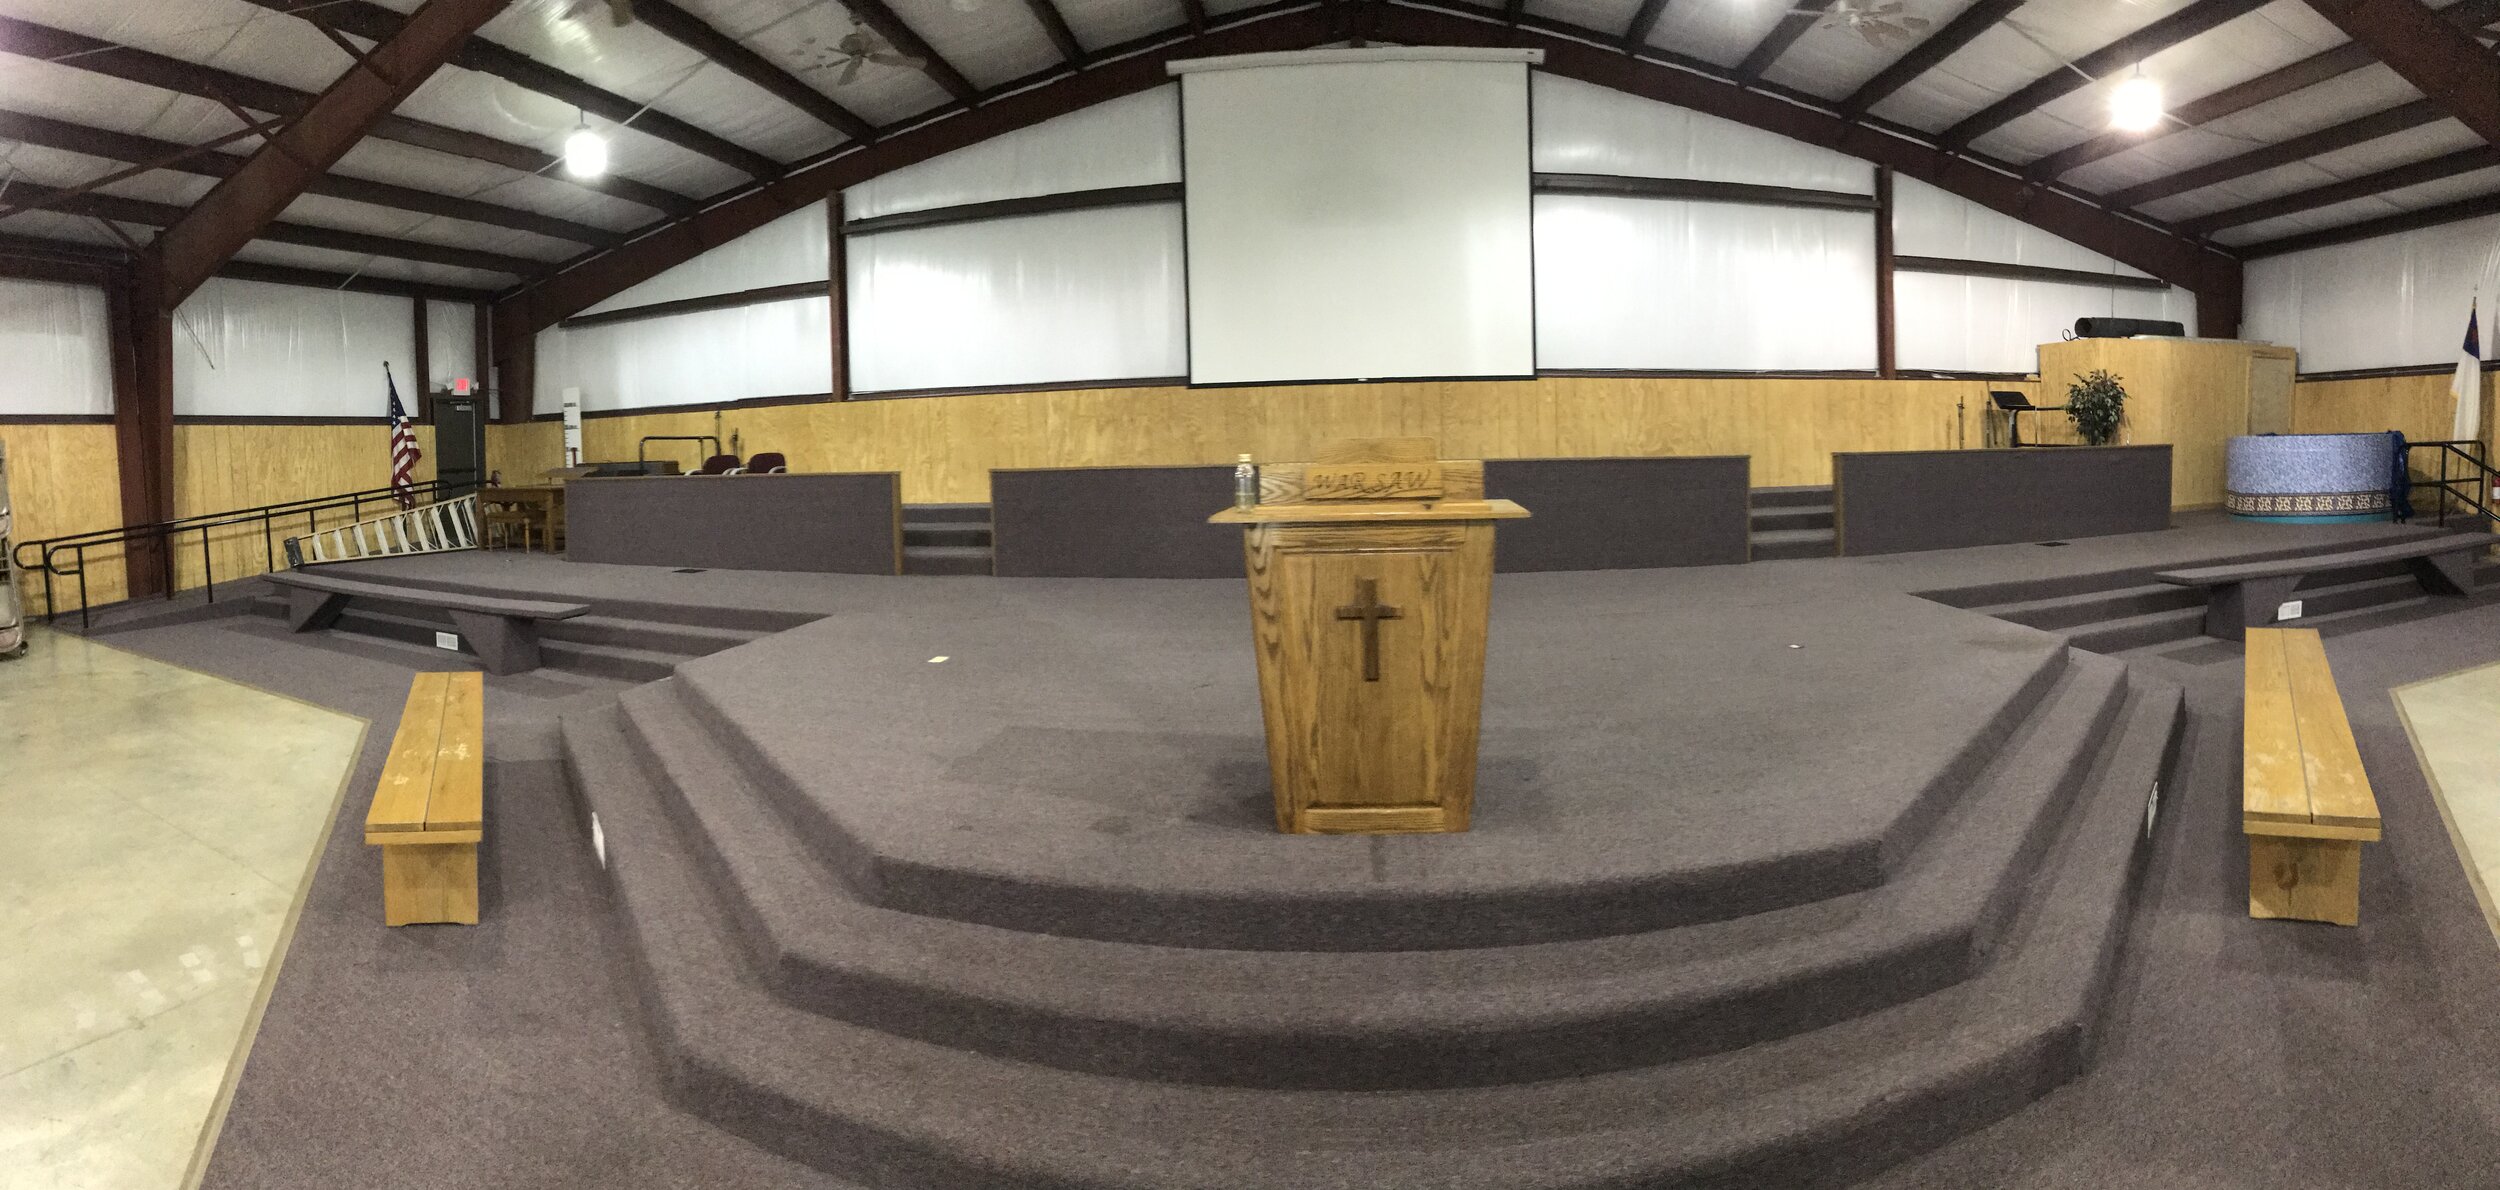  The tabernacle can seat over 500+ and features an open concept as the walls can be removed  as needed 